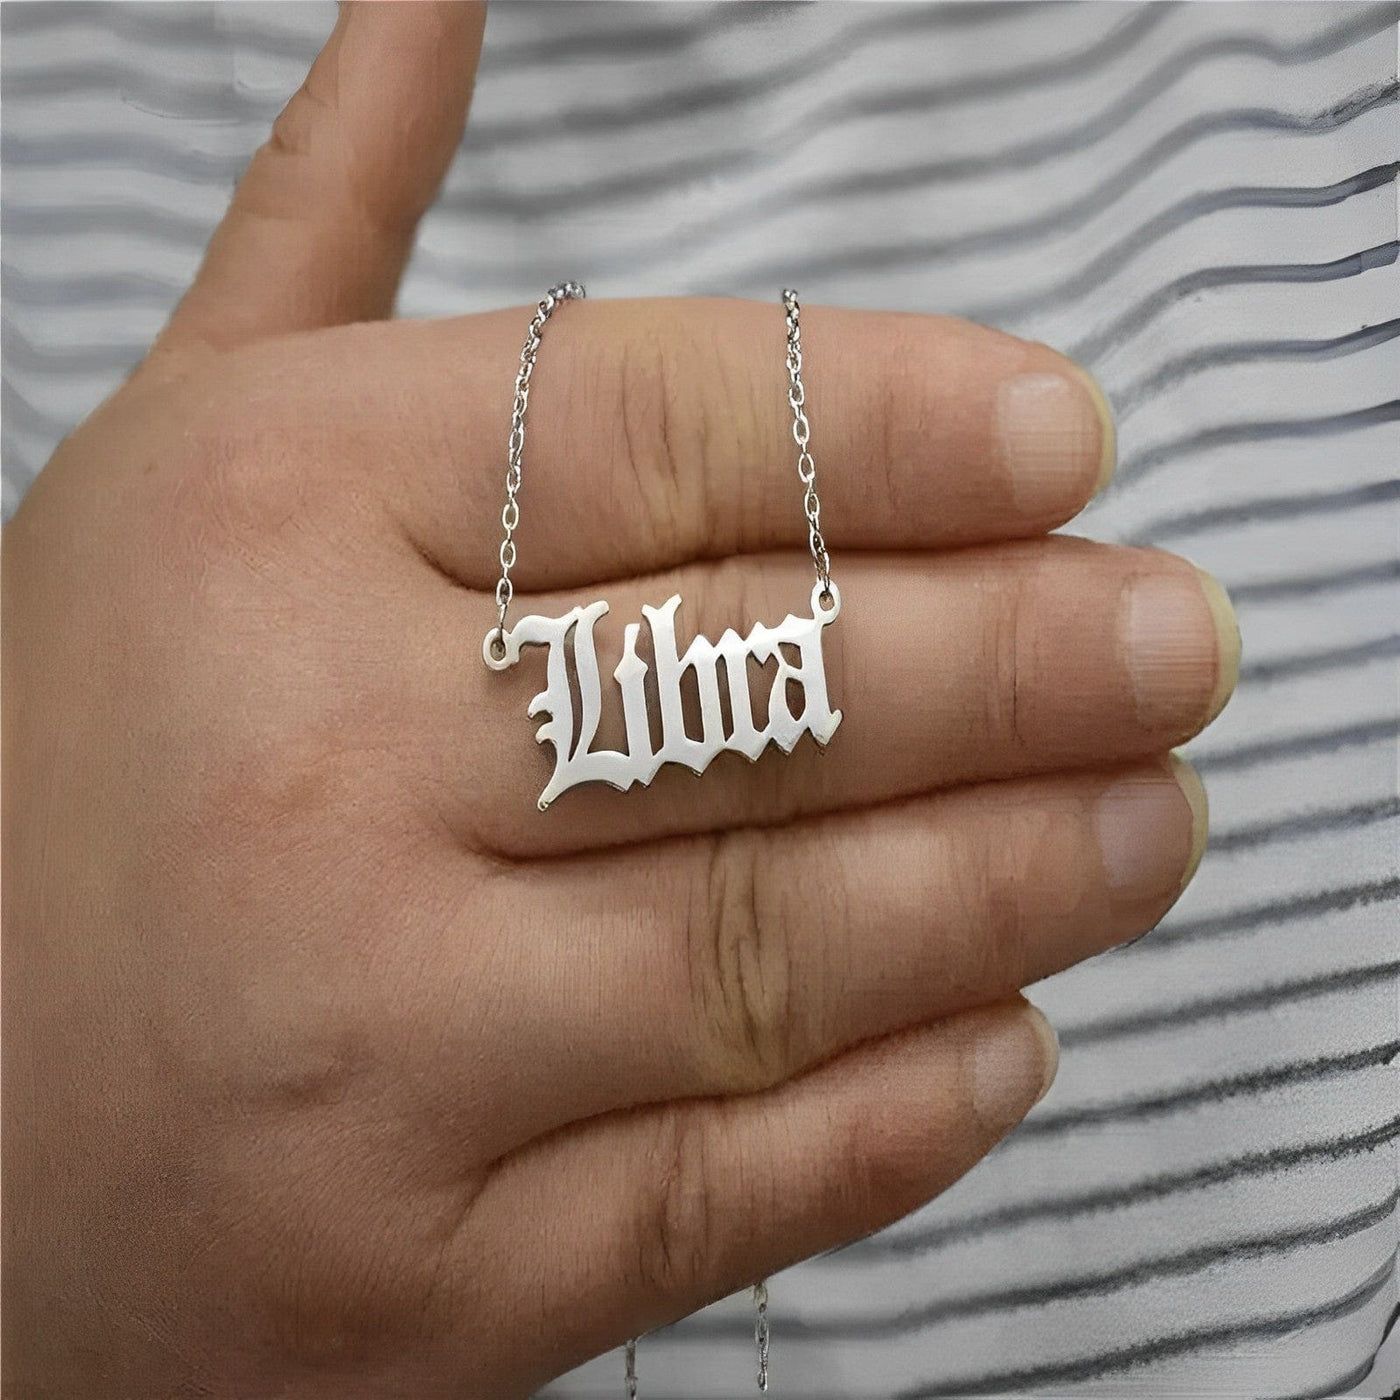 BROOCHITON Necklaces Silver / Libra English Letter Constellation Necklaces